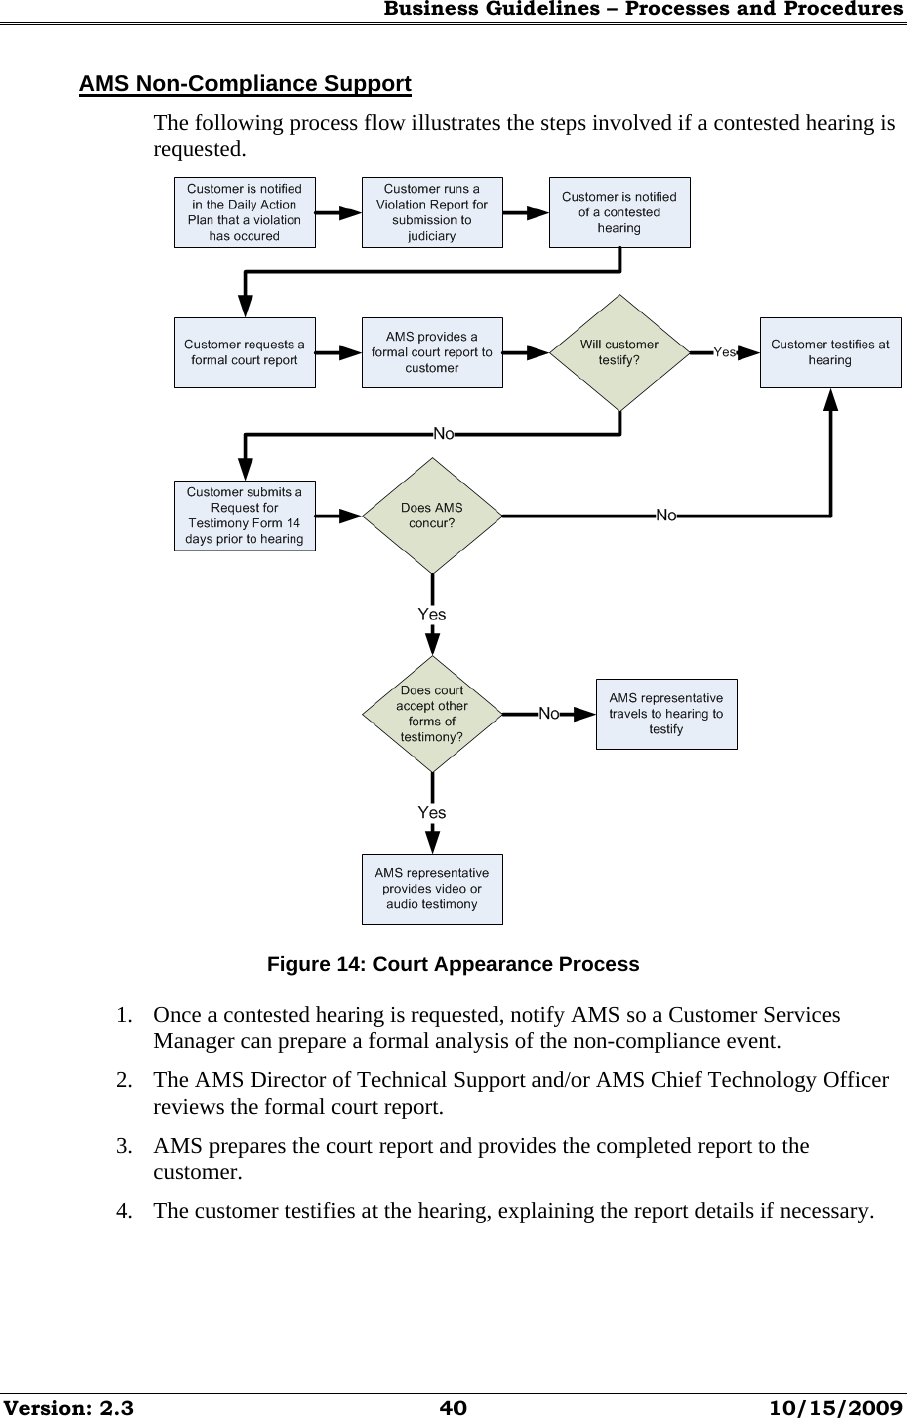 Business Guidelines – Processes and Procedures Version: 2.3  40  10/15/2009 AMS Non-Compliance Support The following process flow illustrates the steps involved if a contested hearing is requested.  Figure 14: Court Appearance Process 1. Once a contested hearing is requested, notify AMS so a Customer Services Manager can prepare a formal analysis of the non-compliance event. 2. The AMS Director of Technical Support and/or AMS Chief Technology Officer reviews the formal court report. 3. AMS prepares the court report and provides the completed report to the customer. 4. The customer testifies at the hearing, explaining the report details if necessary. 